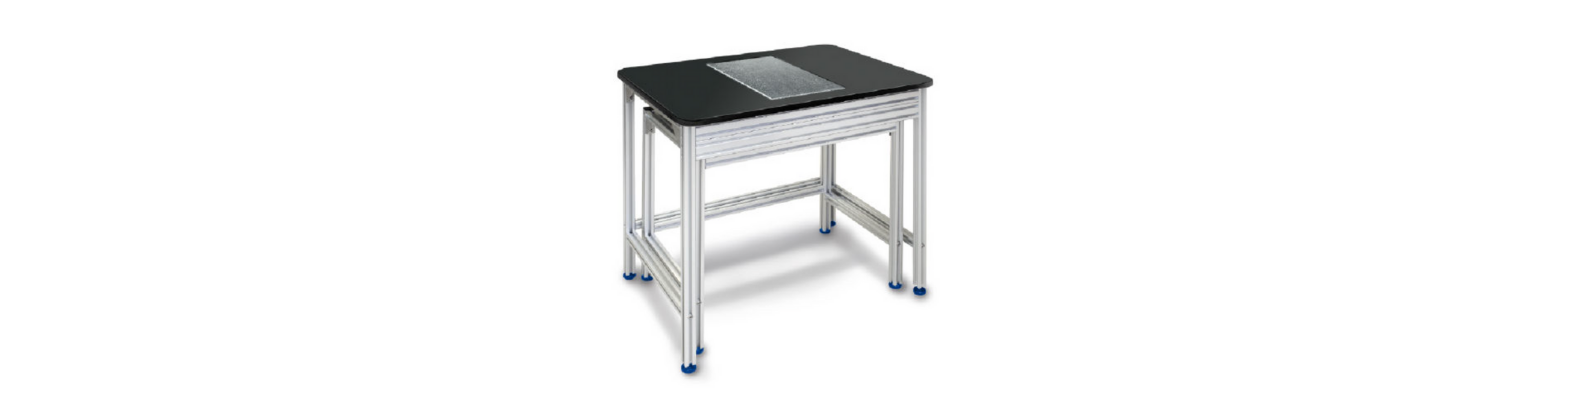 Antivibration / weighing table by KERN